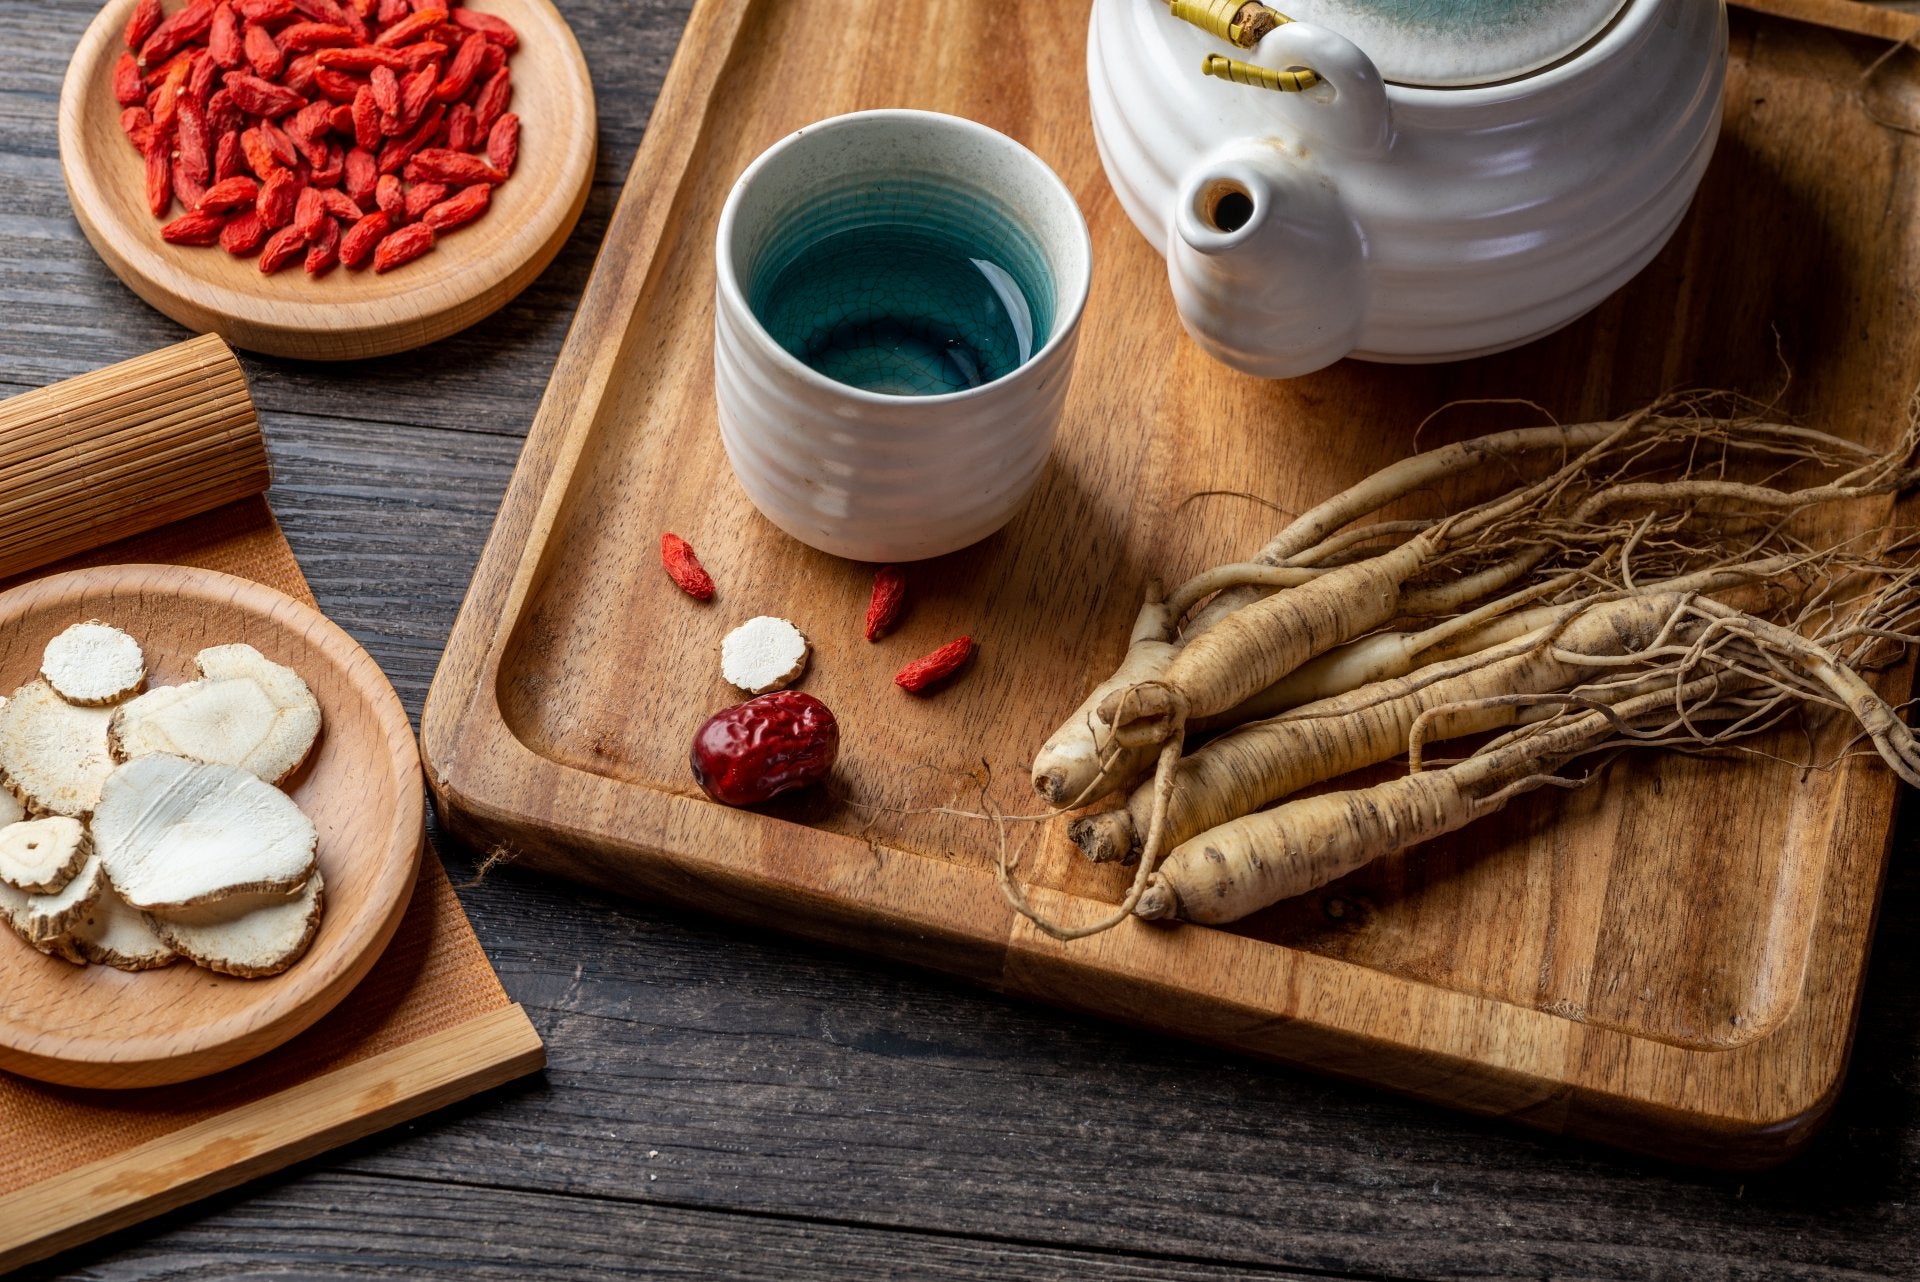 What is Ginseng? What is Red Ginseng